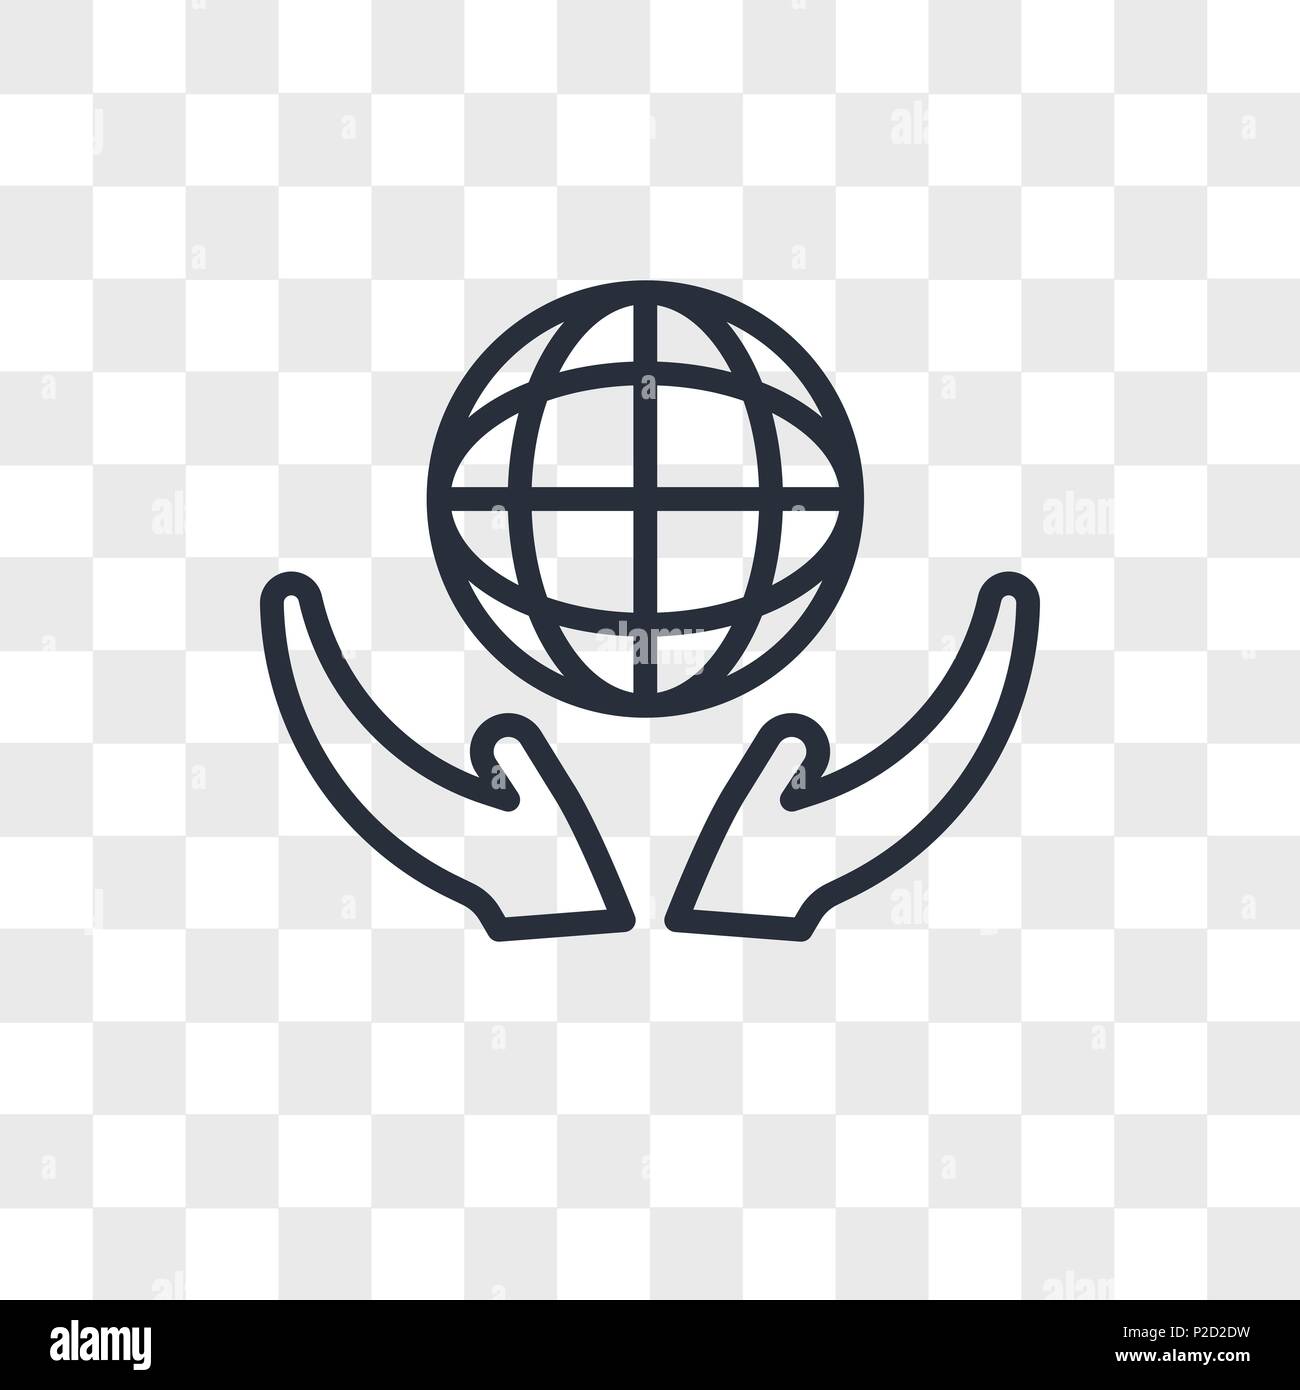 World In Our Hands Vector Icon Isolated On Transparent Background World In Our Hands Logo Concept Stock Vector Image Art Alamy